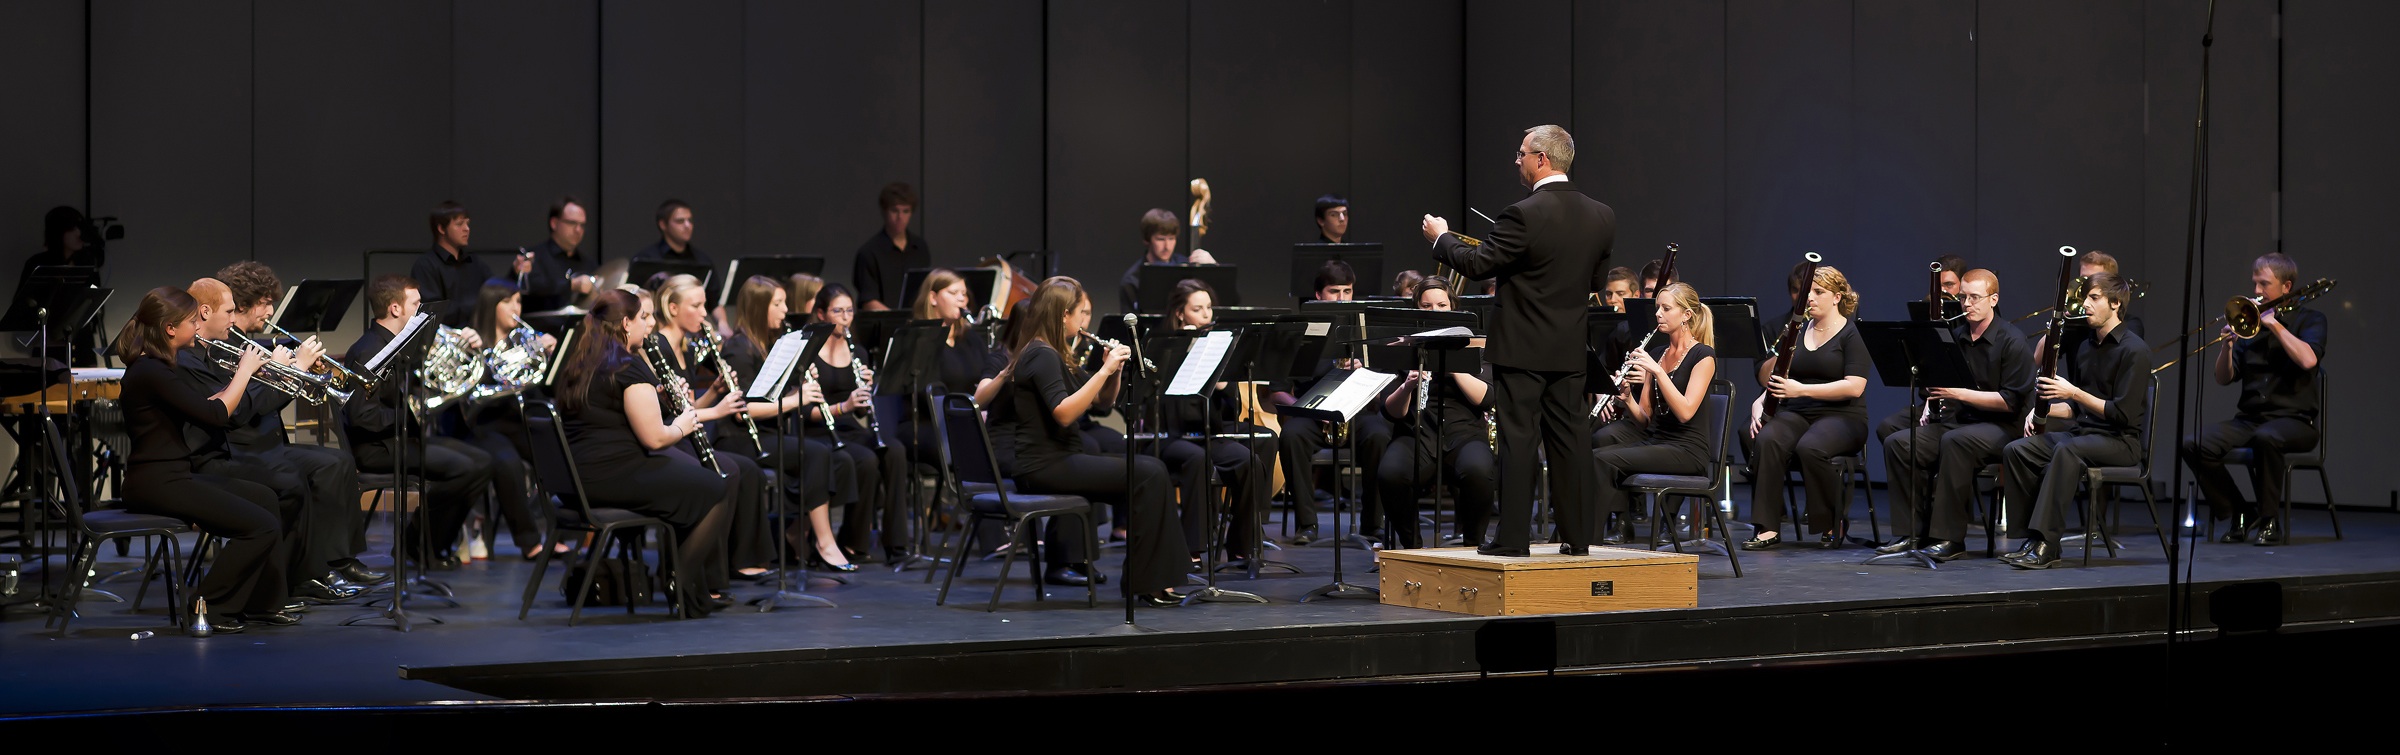 Ouachita’s Wind Ensemble recognized for musical achievement by College Band Directors National Association.